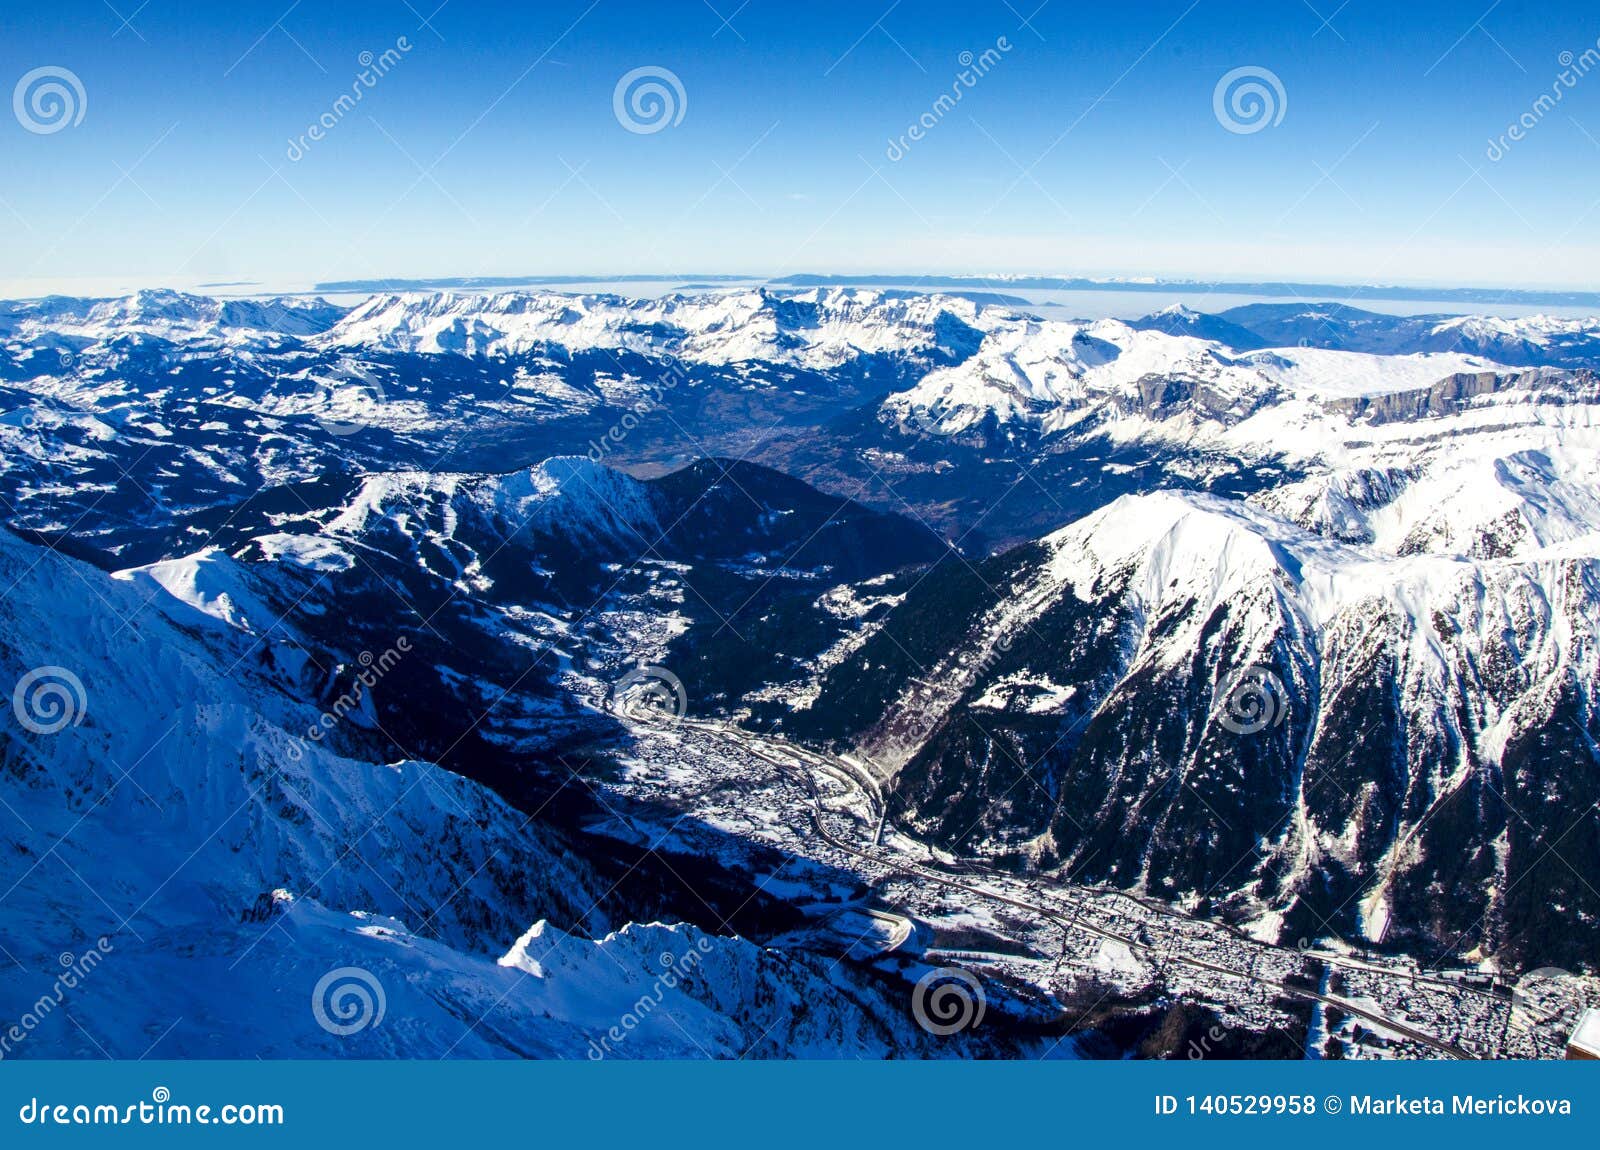 amazing view of french town called chamonix-mont-blanc. all around the summits of alps covered with snow.